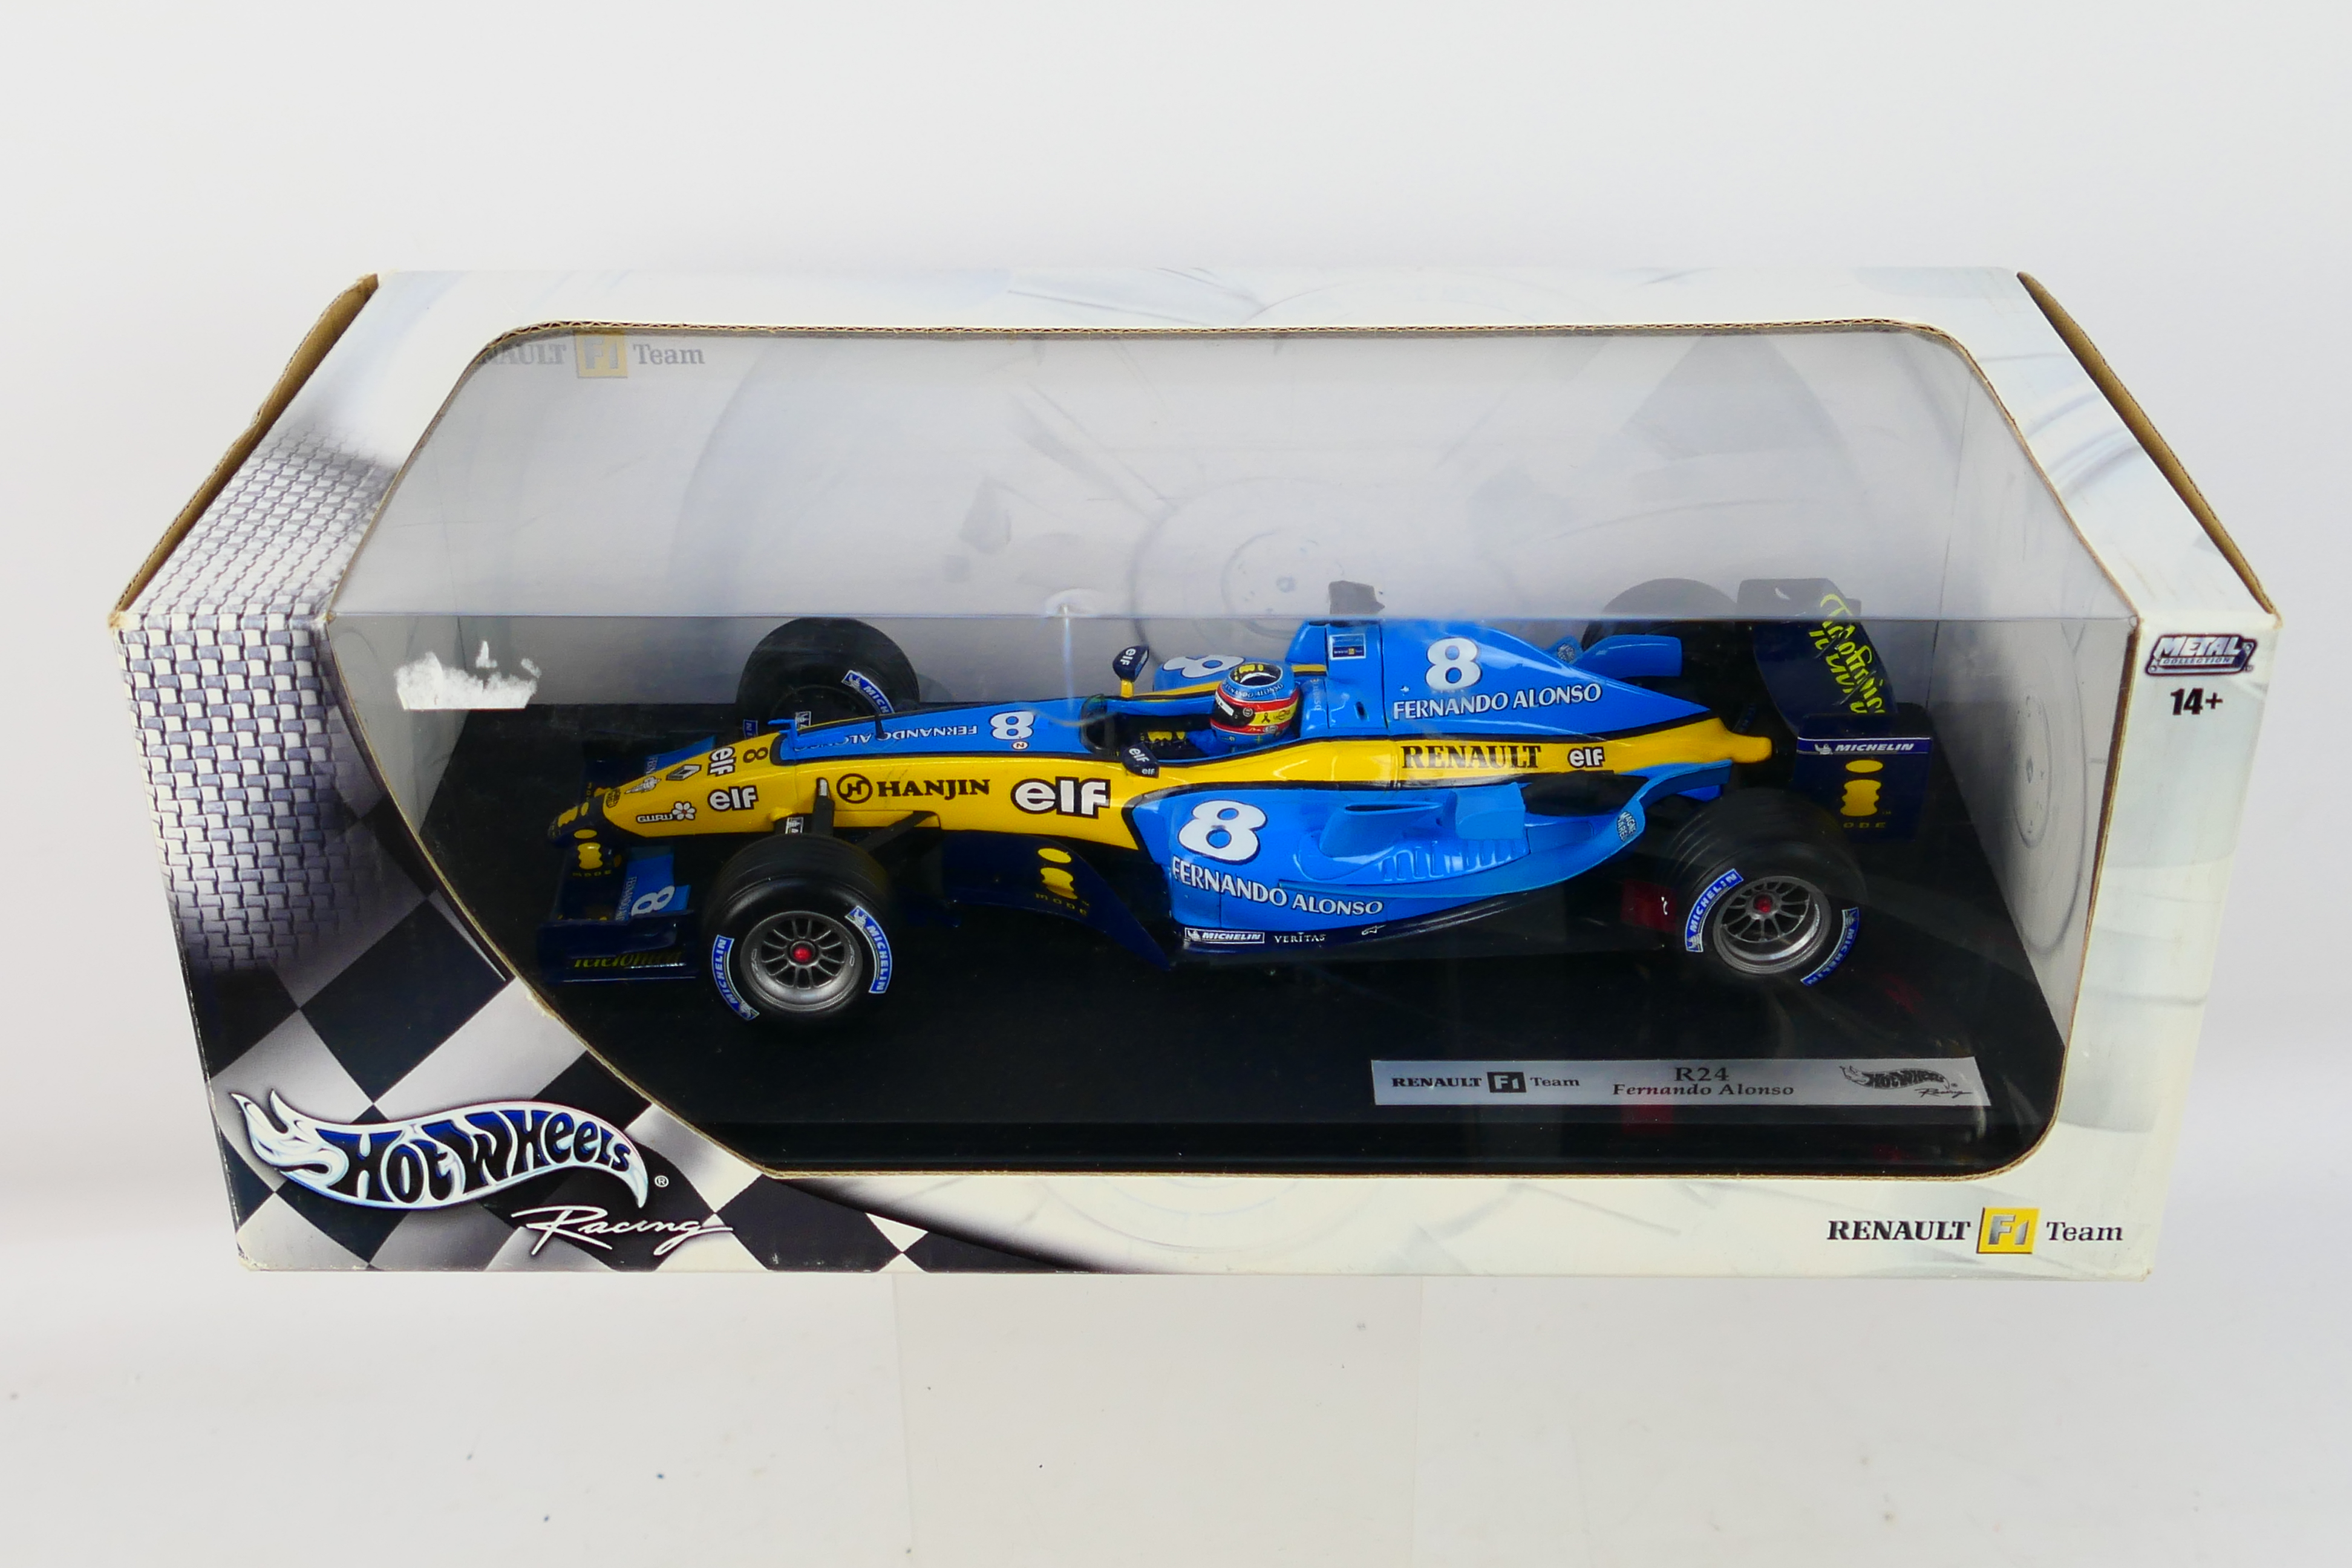 Hot Wheels - A boxed 1:18 scale Renault R24 Fernando Alonso car which appears Mint in a Good box - Image 3 of 3